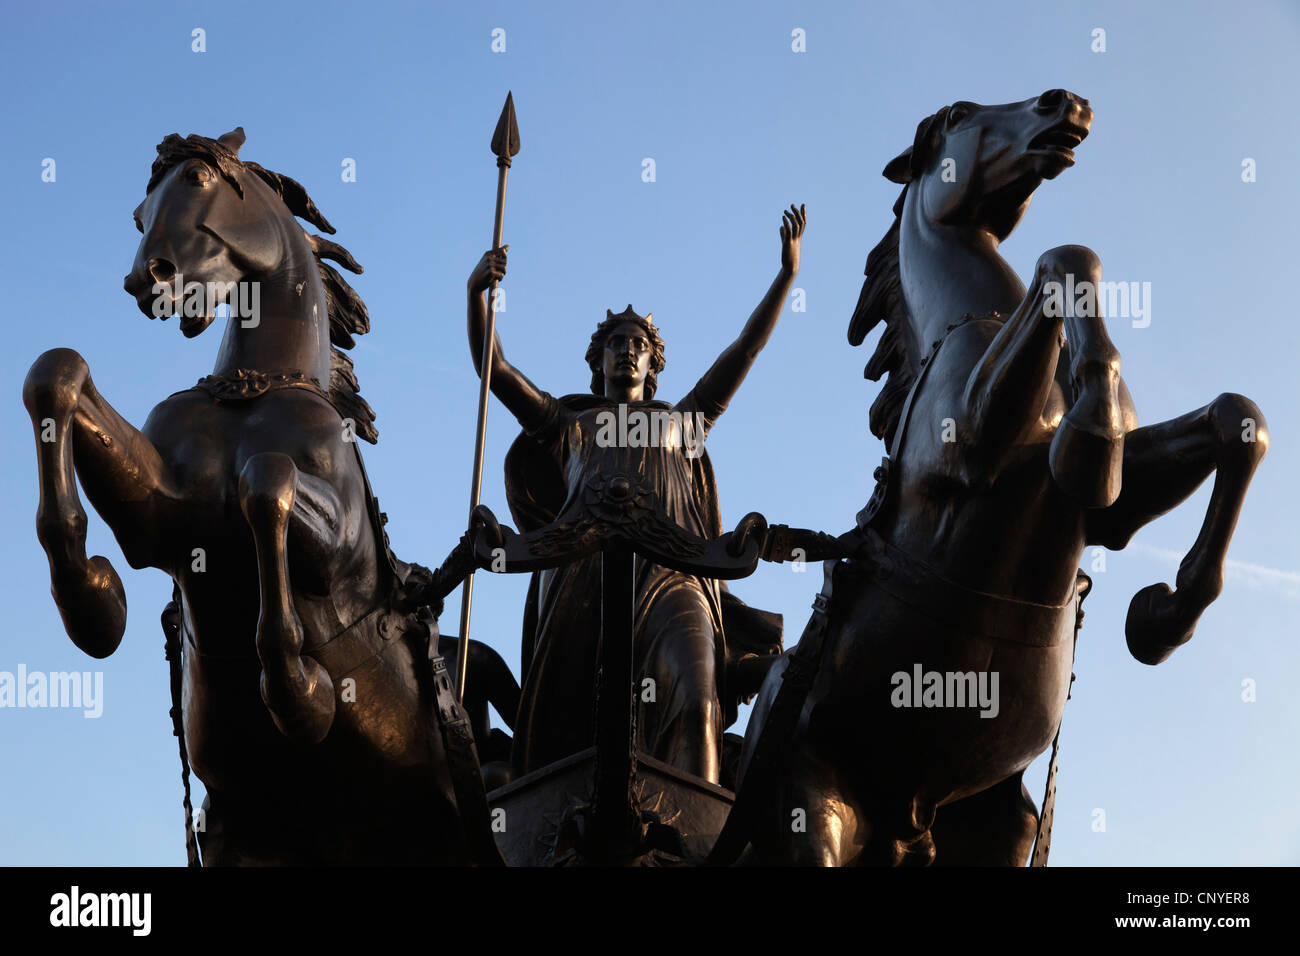 Statue of Boudicea on her chariot, Westminster London Stock Photo